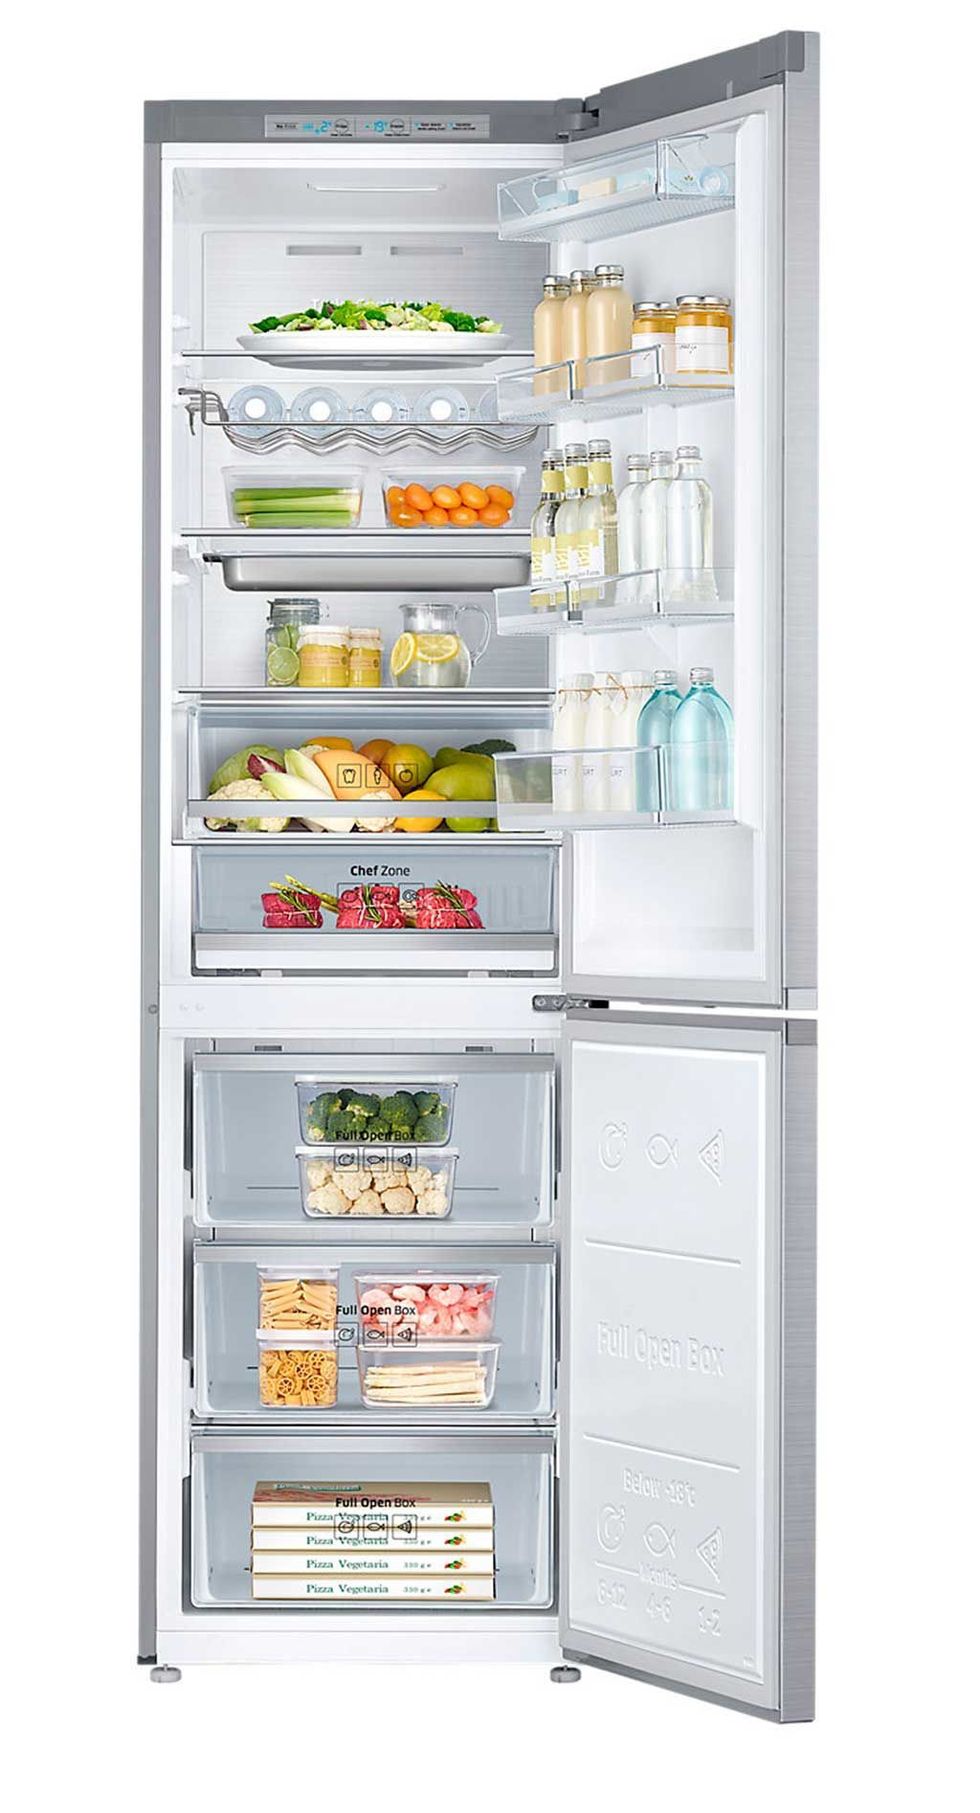 Major appliance, Food, Freezer, Kitchen appliance, Home appliance, Refrigerator, Food group, Cuisine, Recipe, Food storage containers, 